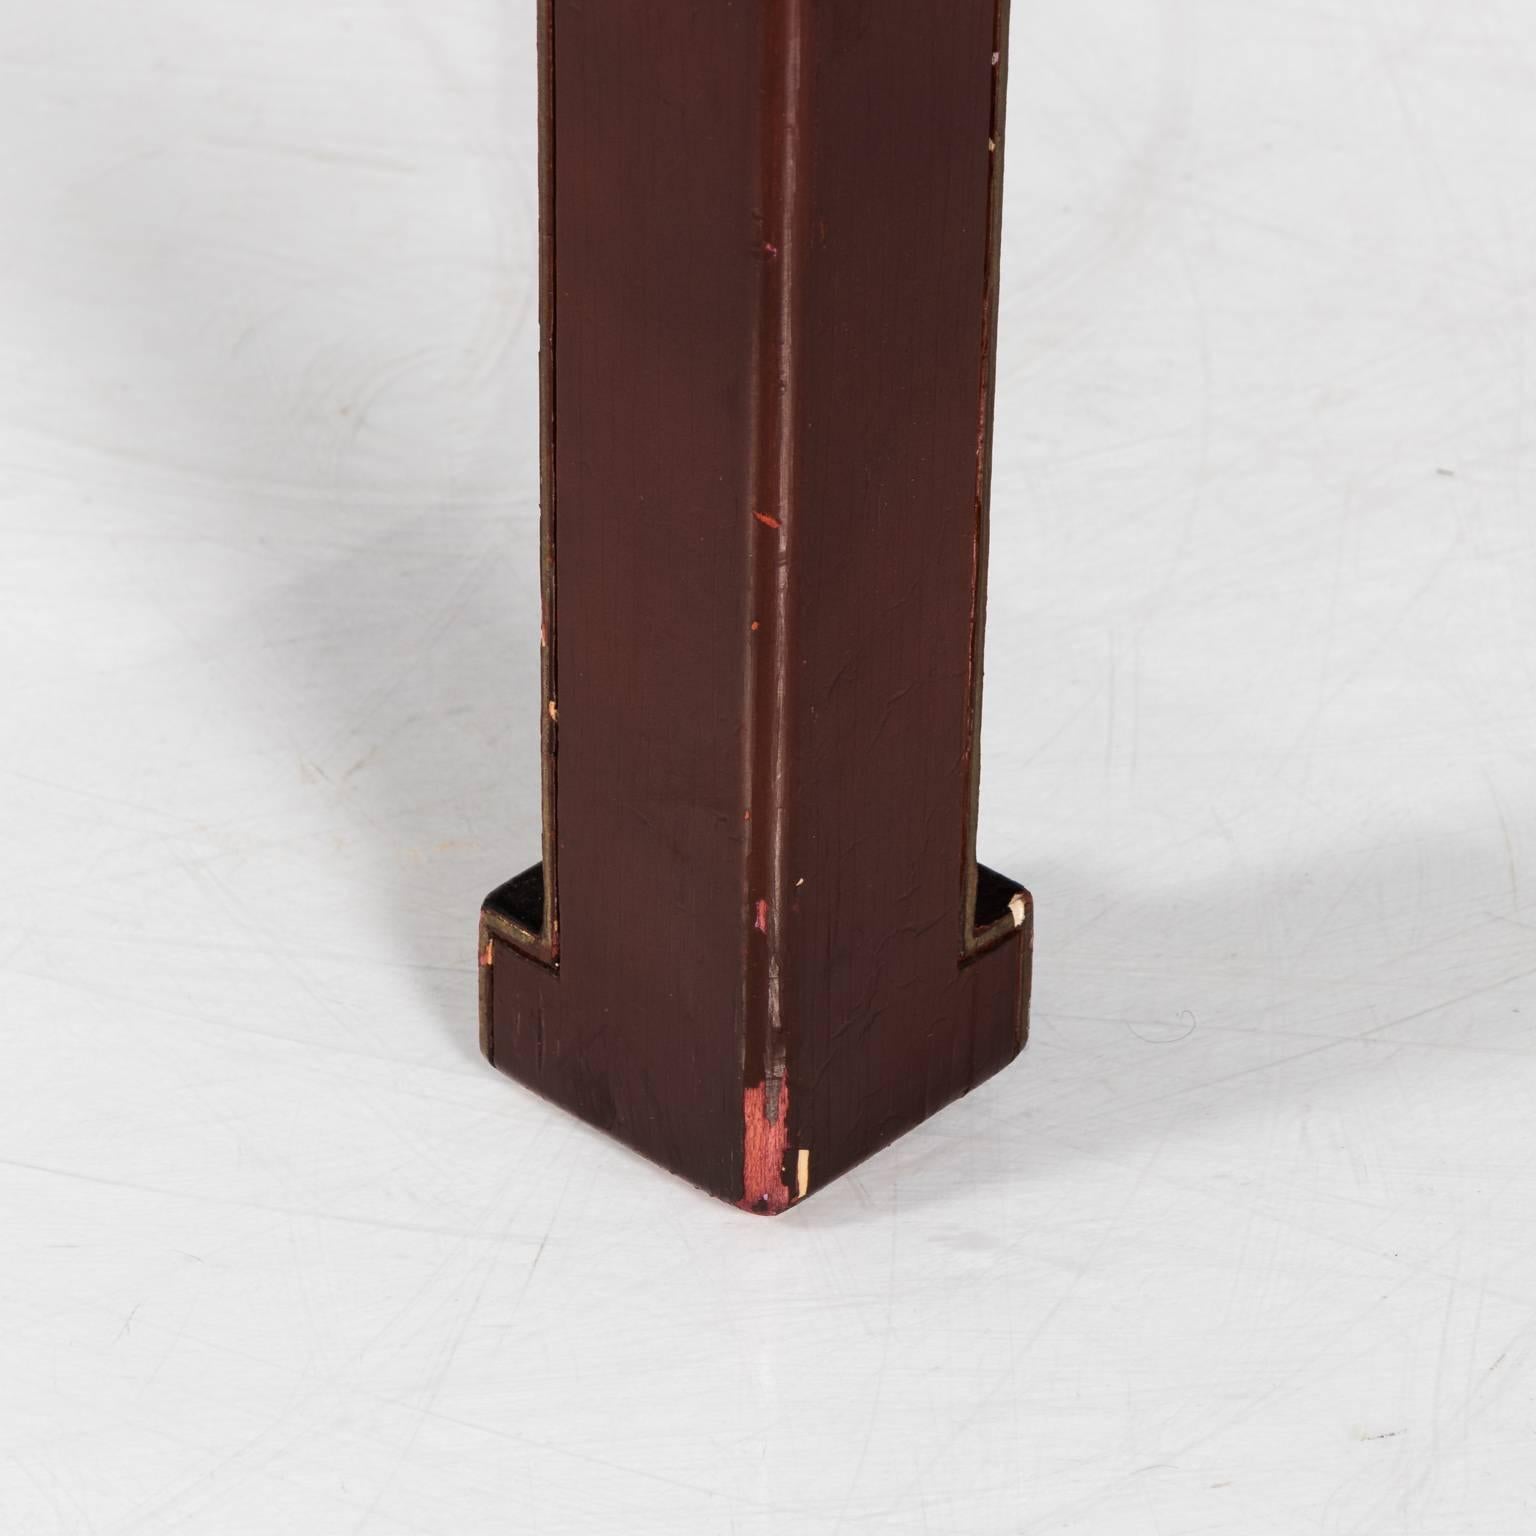 Red lacquered Japanese Kimono box on a stand, circa 19th century.
 